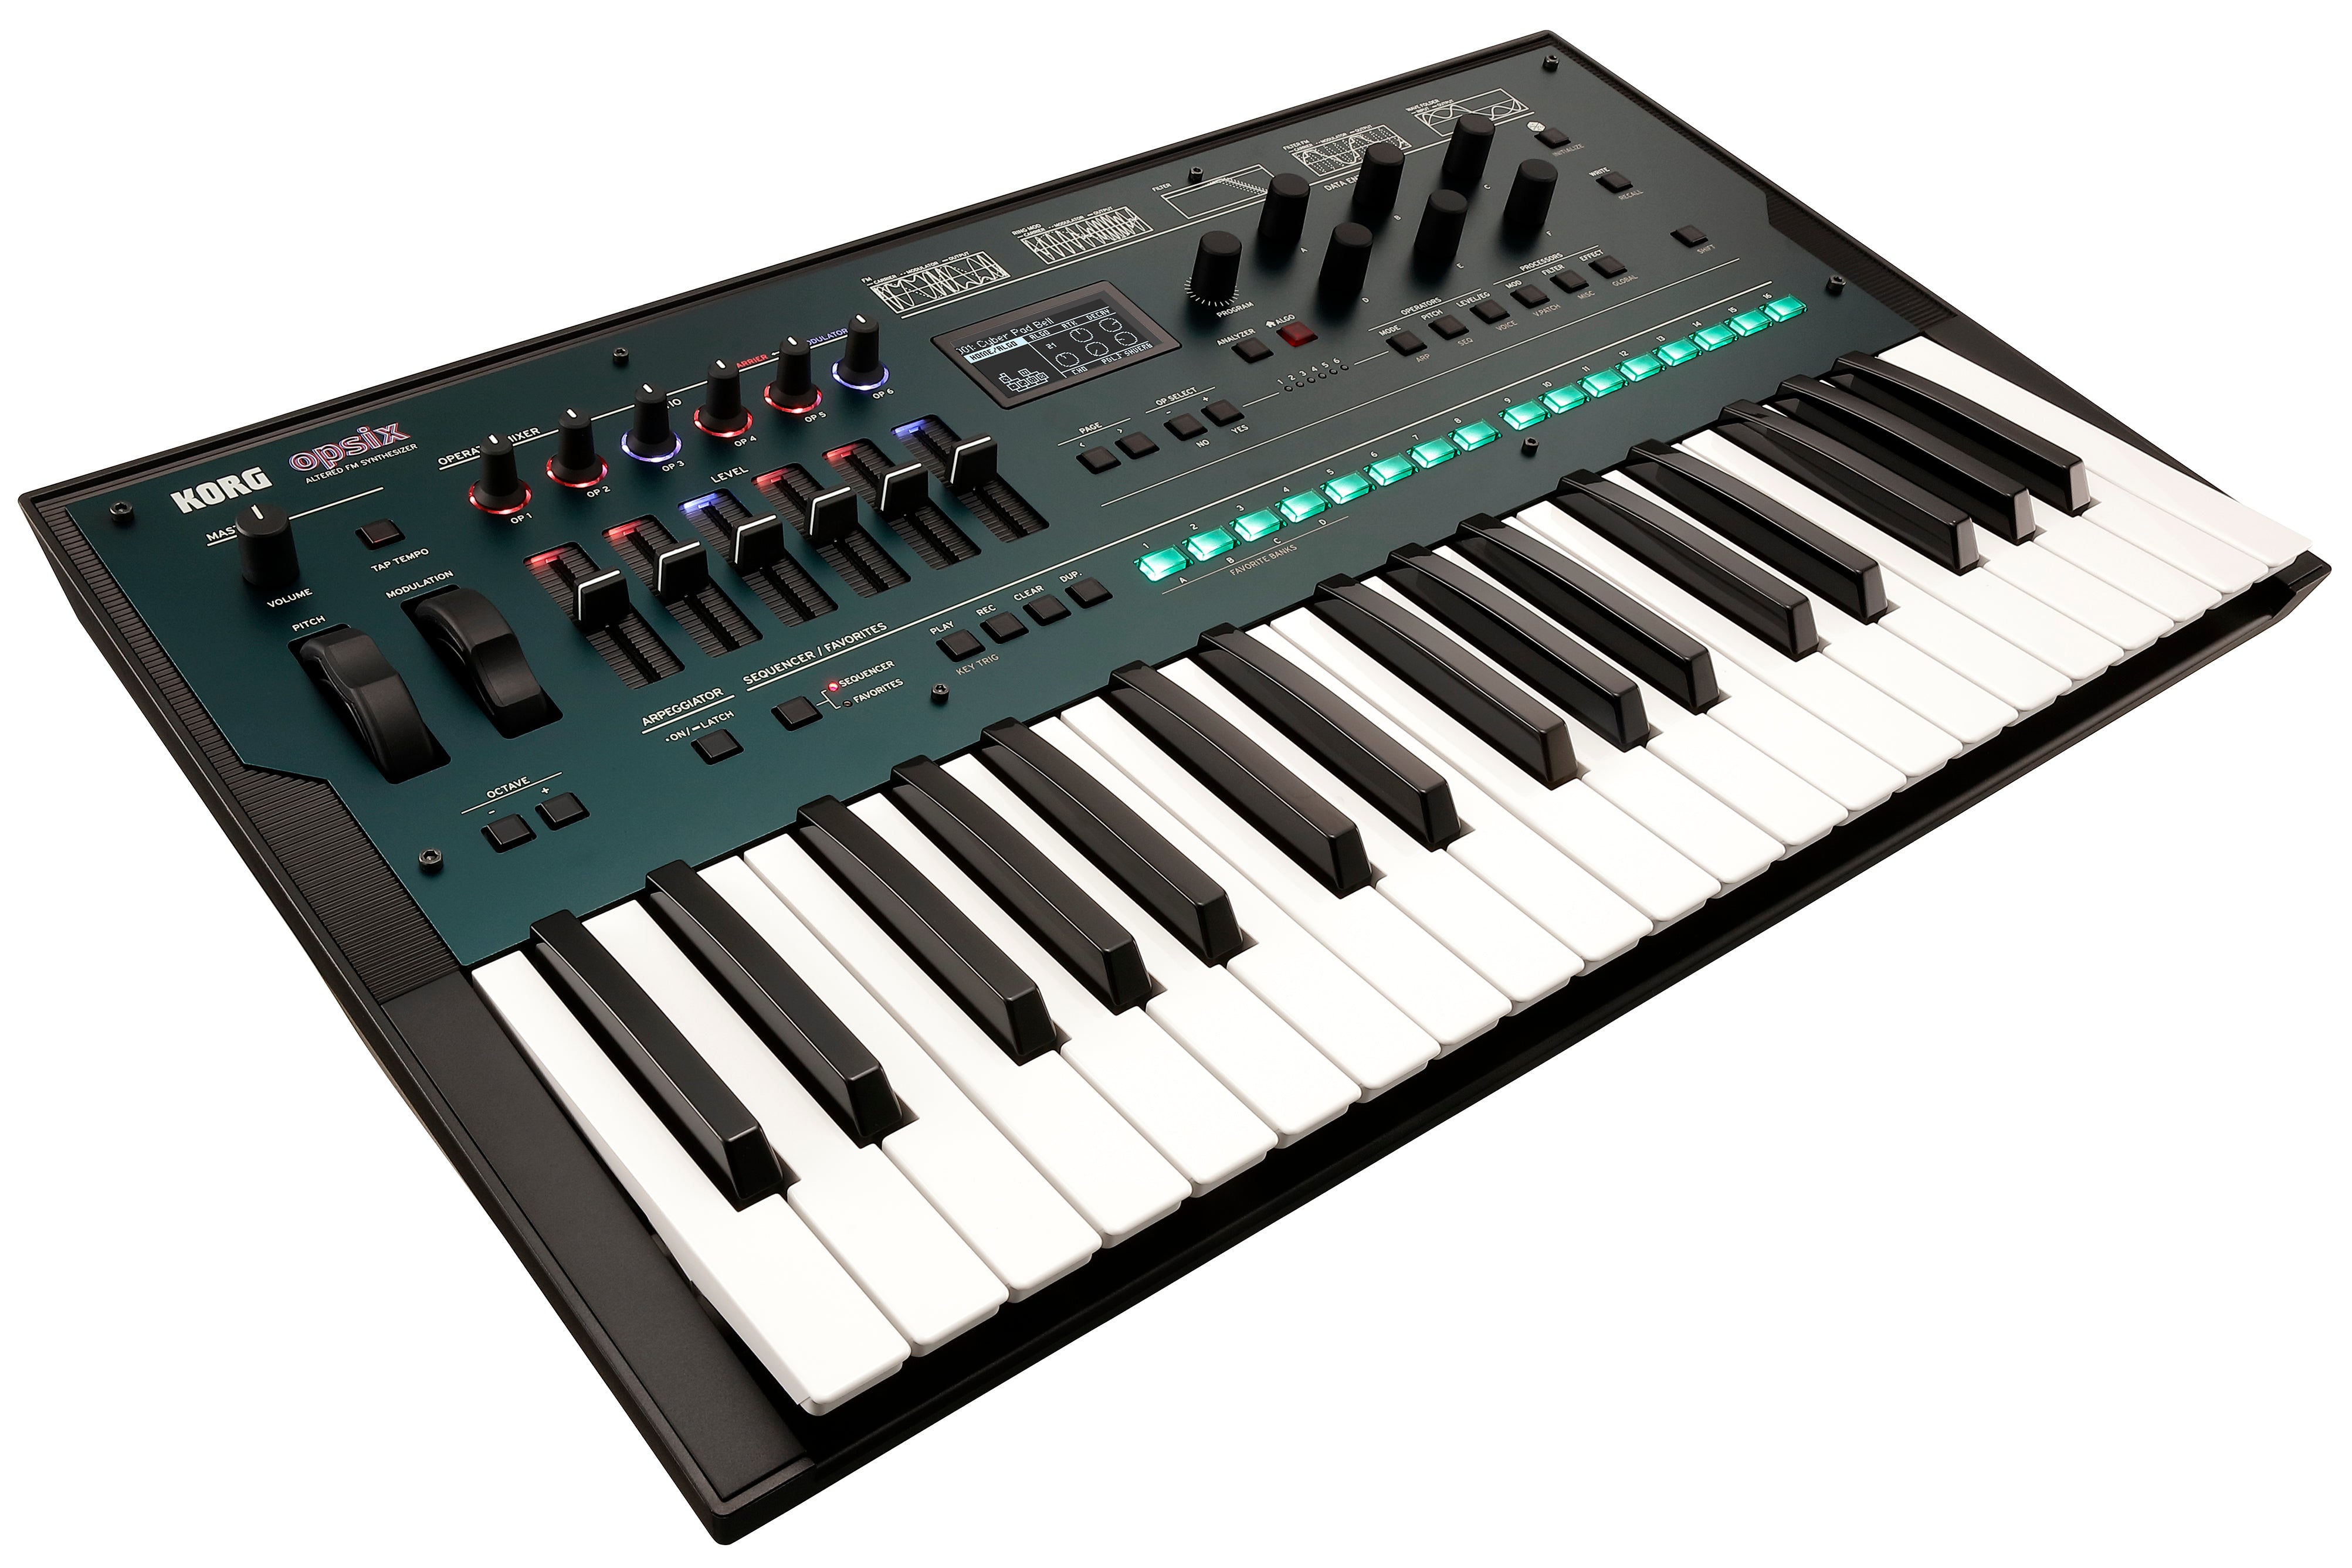 opsix 37-Key FM Synthesizer (Certified Refurbished)